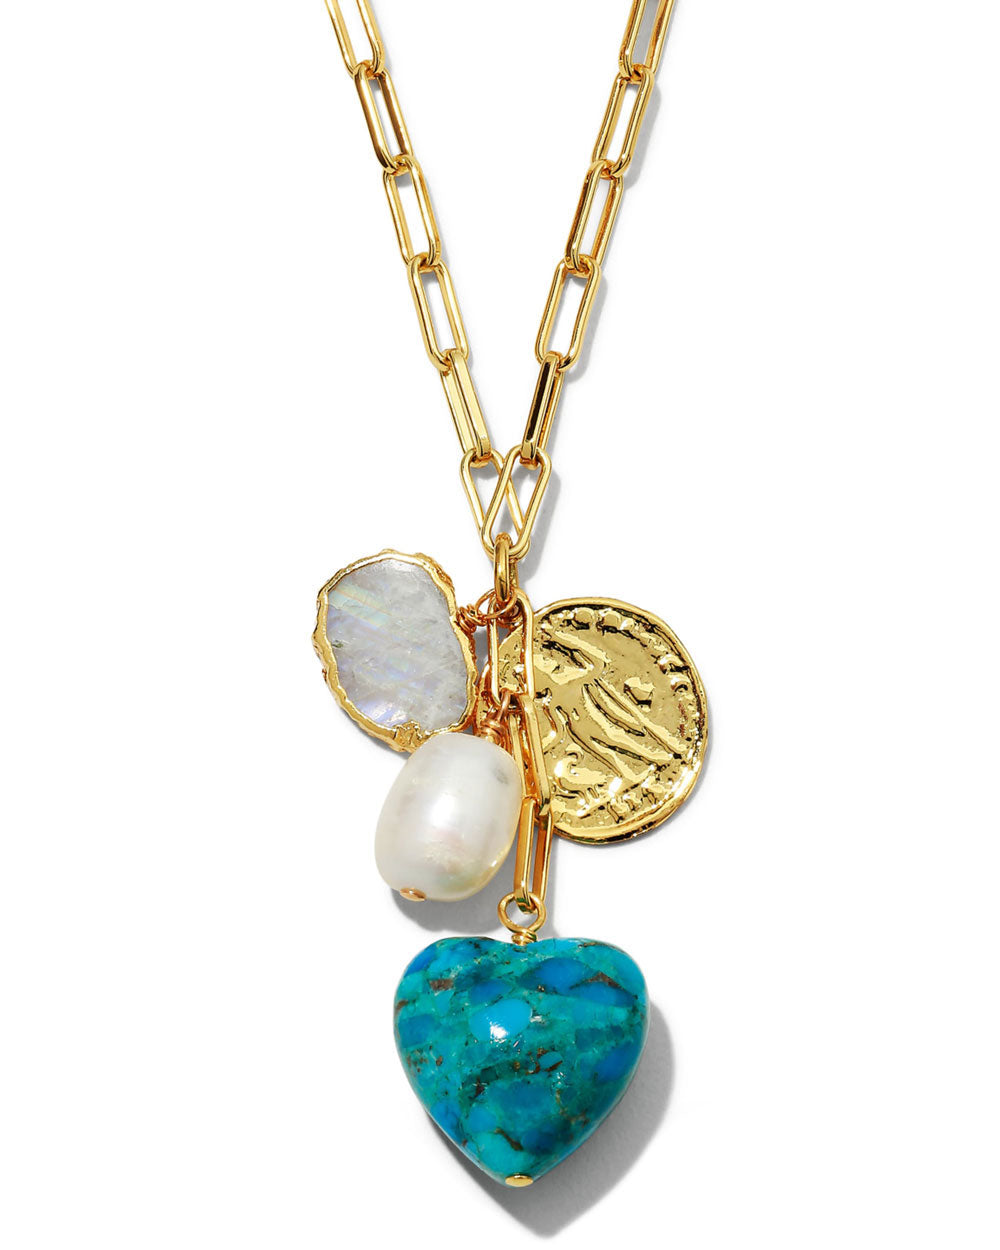 Turquoise Heart Charm Necklace